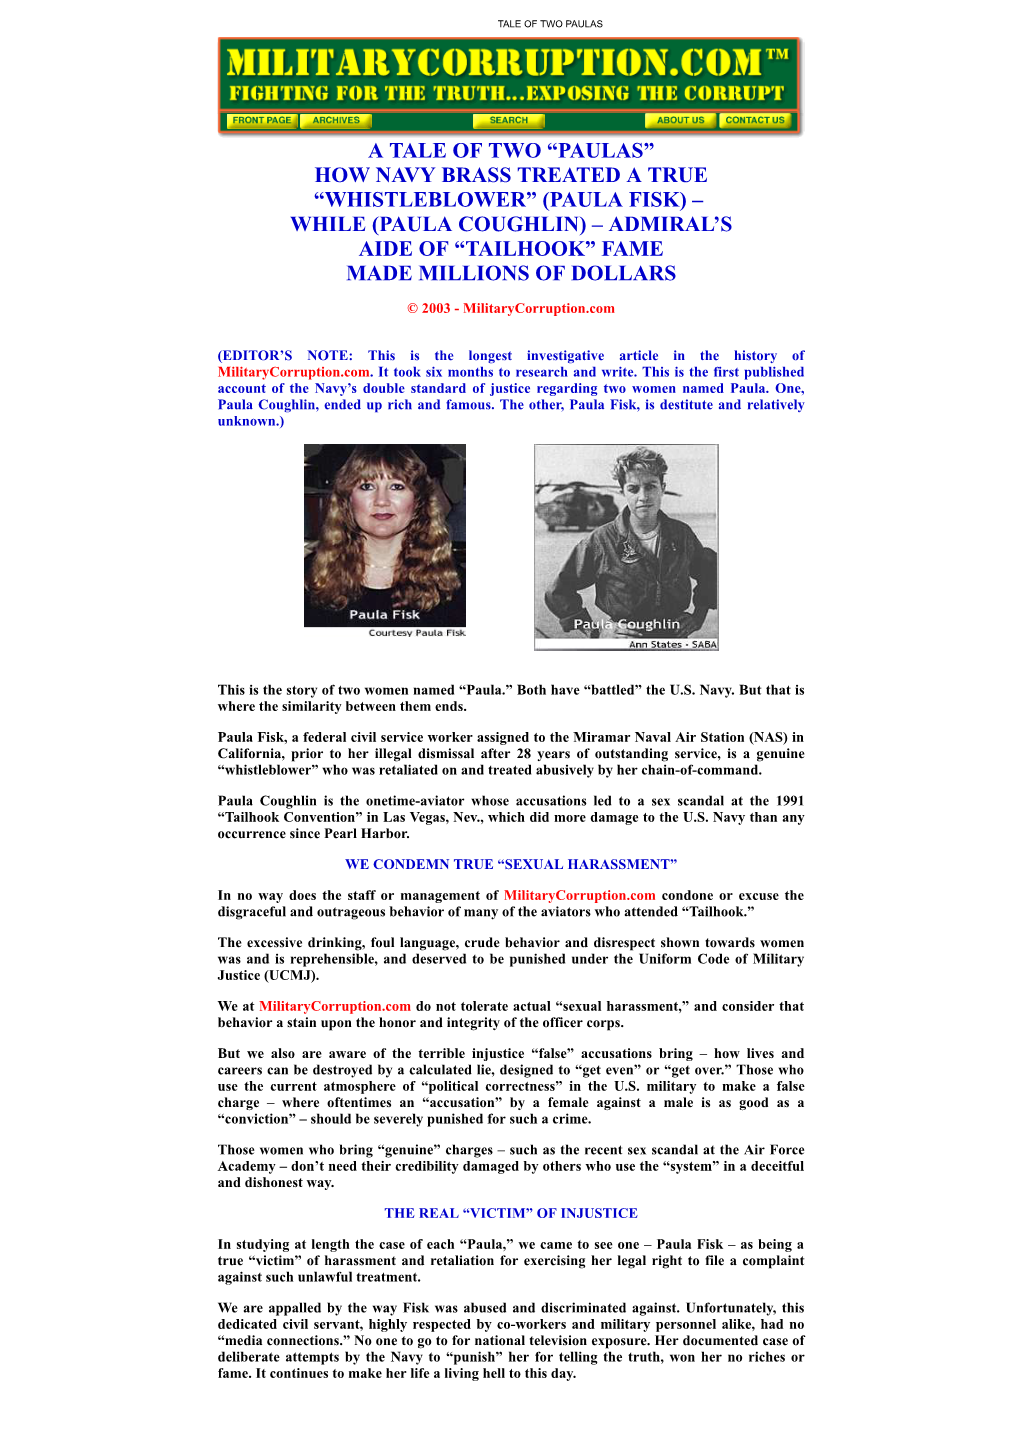 Paula Coughlin) – Admiral ’S Aide of “Tailhook” Fame Made Millions of Dollars